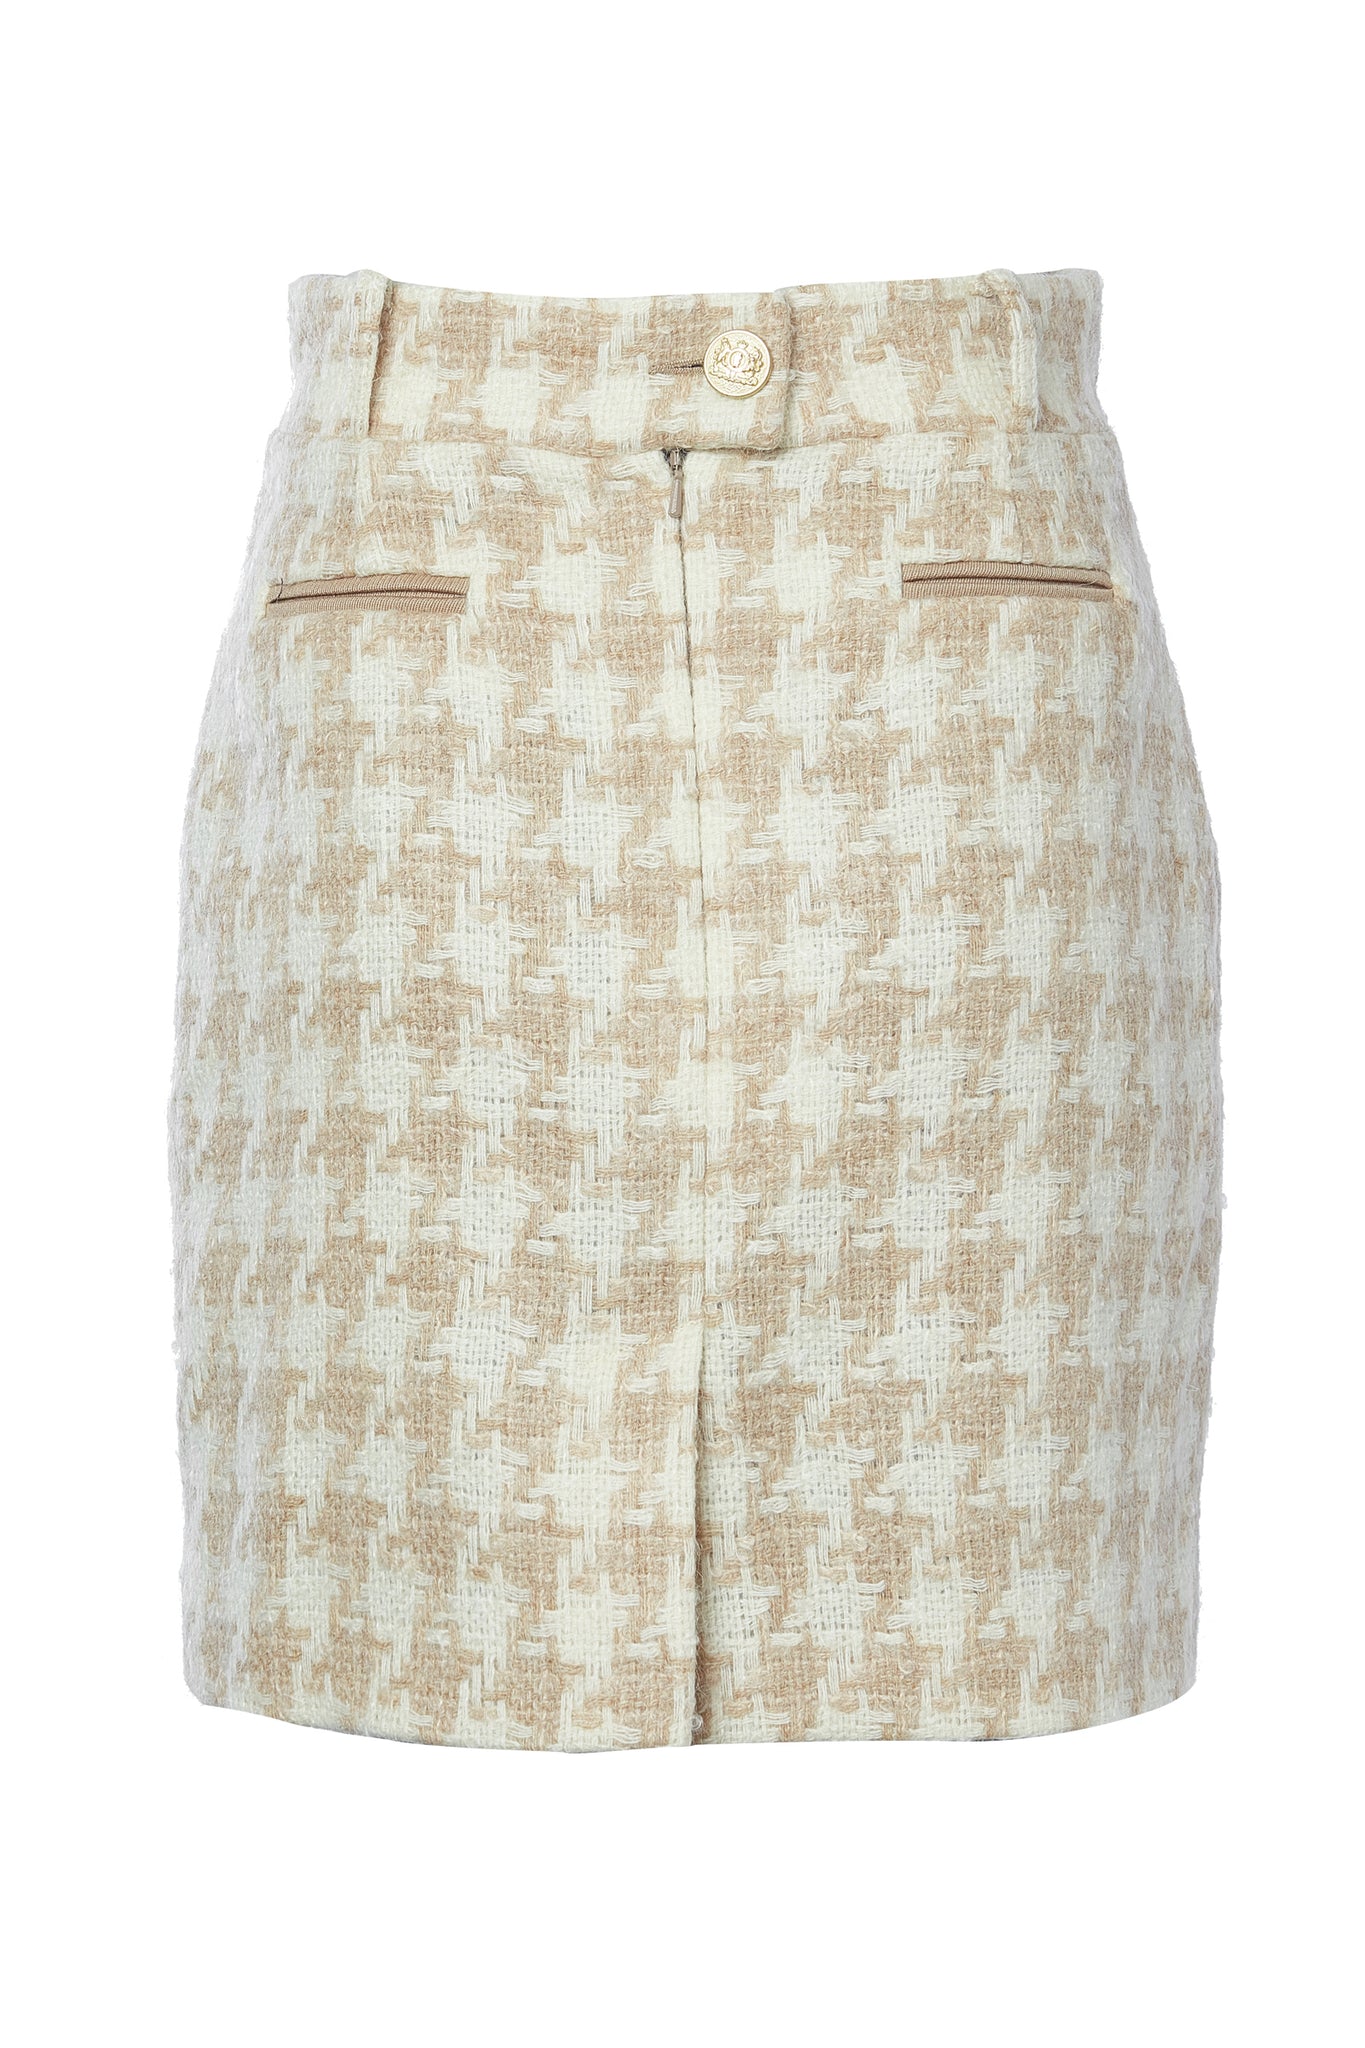 back of womens cream and camel houndstooth wool pencil mini skirt with concealed zip fastening on centre back and gold rivets down front